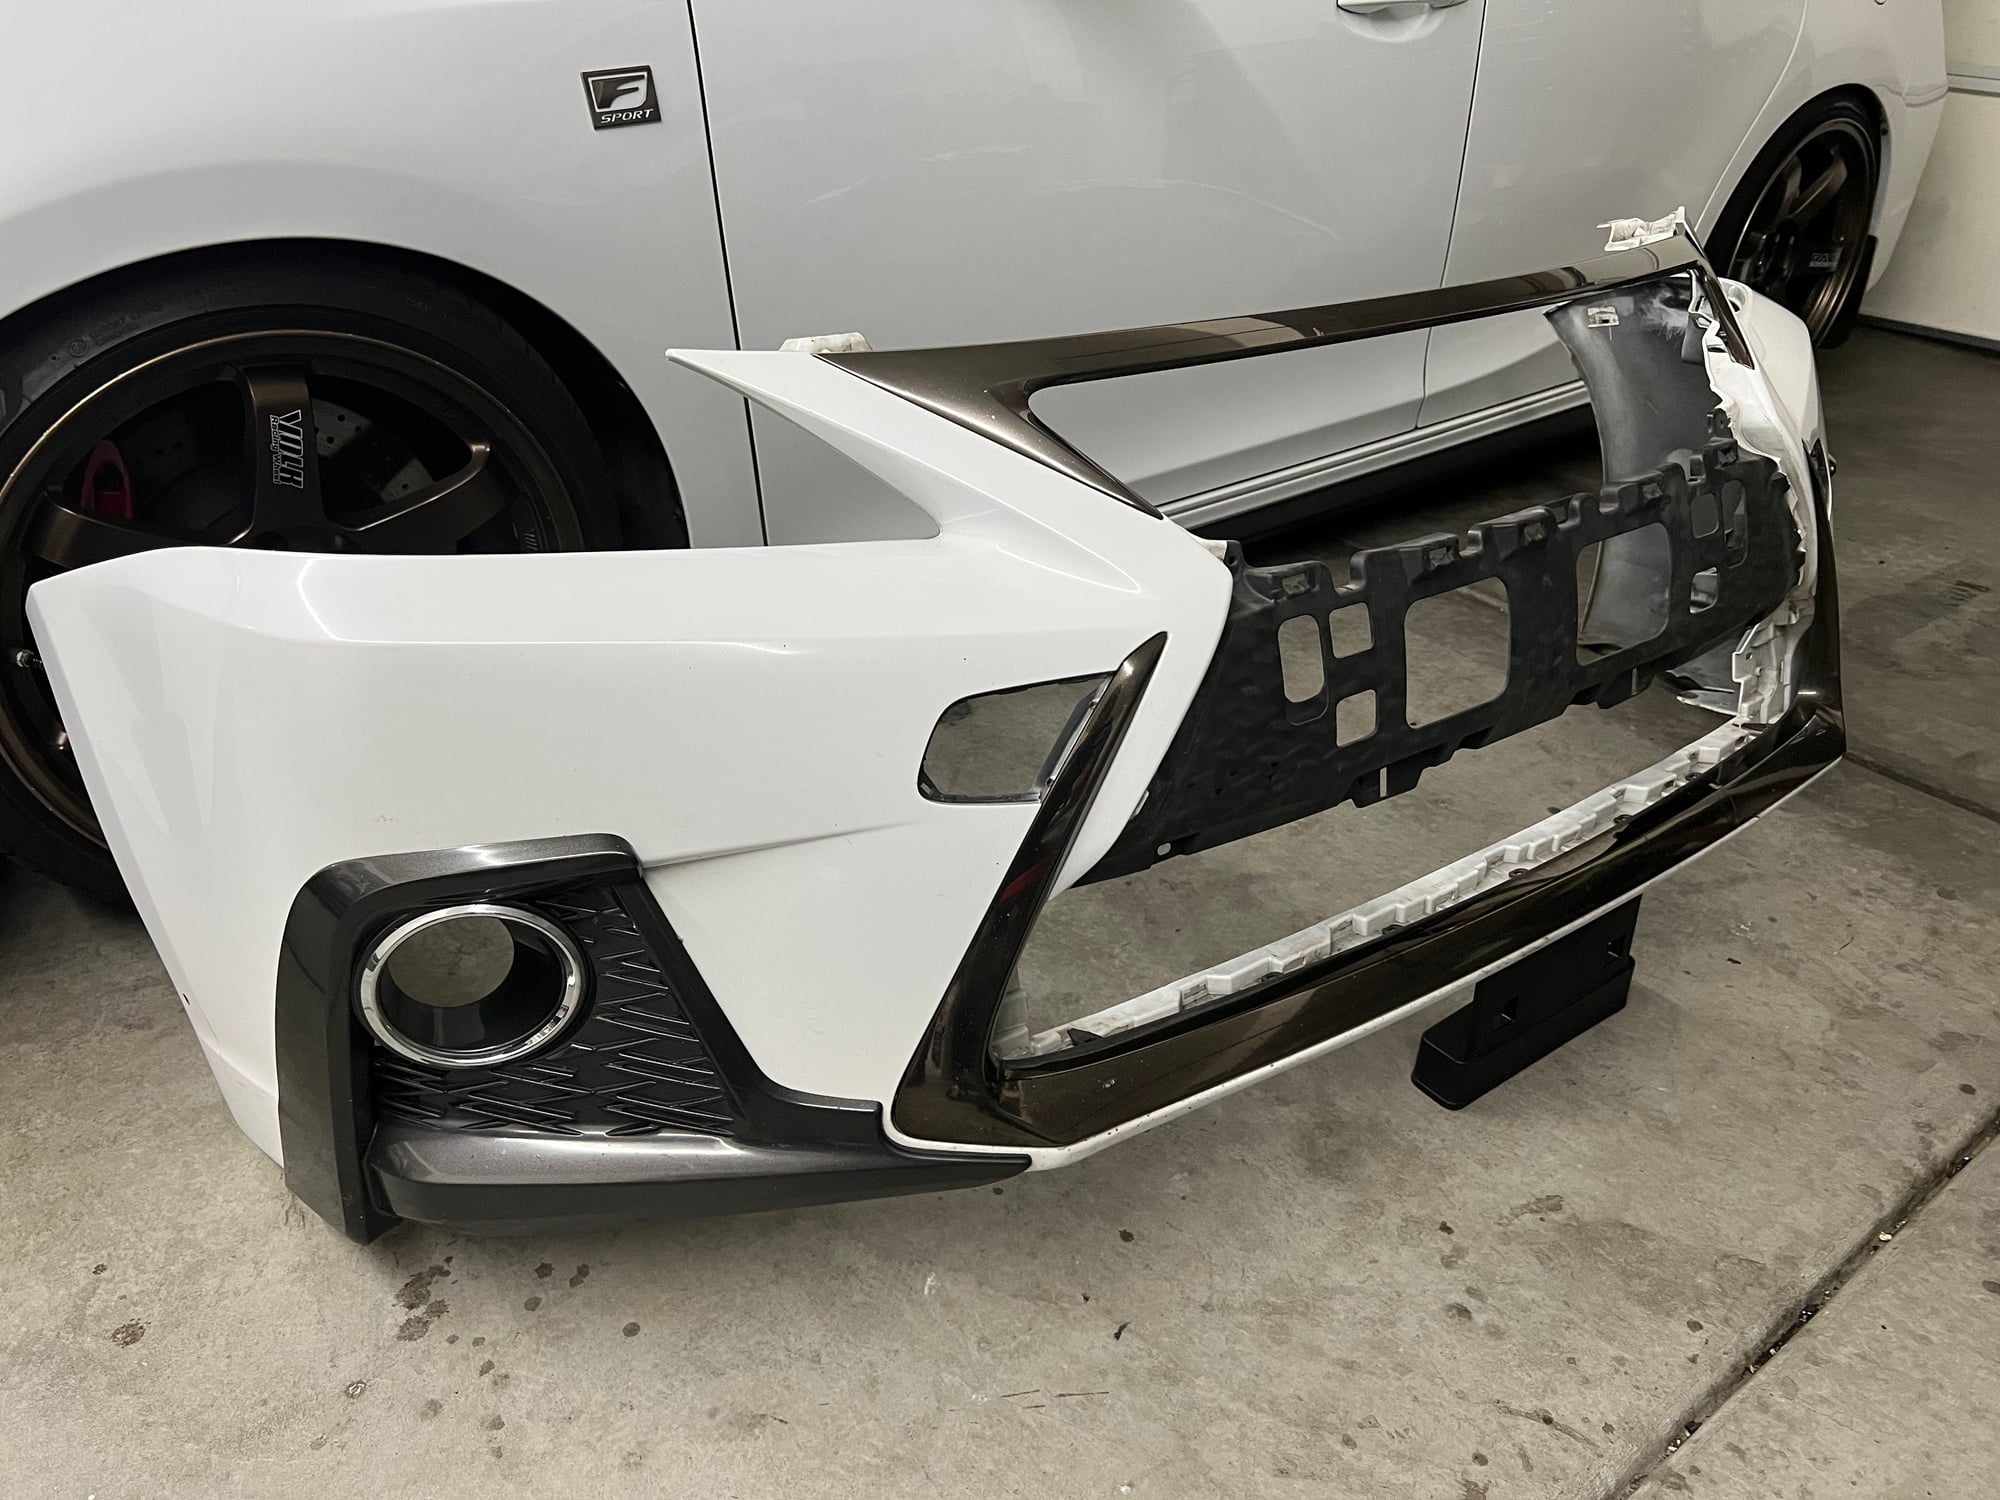 Exterior Body Parts - 2018-2020 F-Sport Fog Lamp Bezels, Black Chrome Mouldings, Front Bumper - Used - 2011 to 2020 Lexus CT200h - Moreno Valley, CA 92555, United States